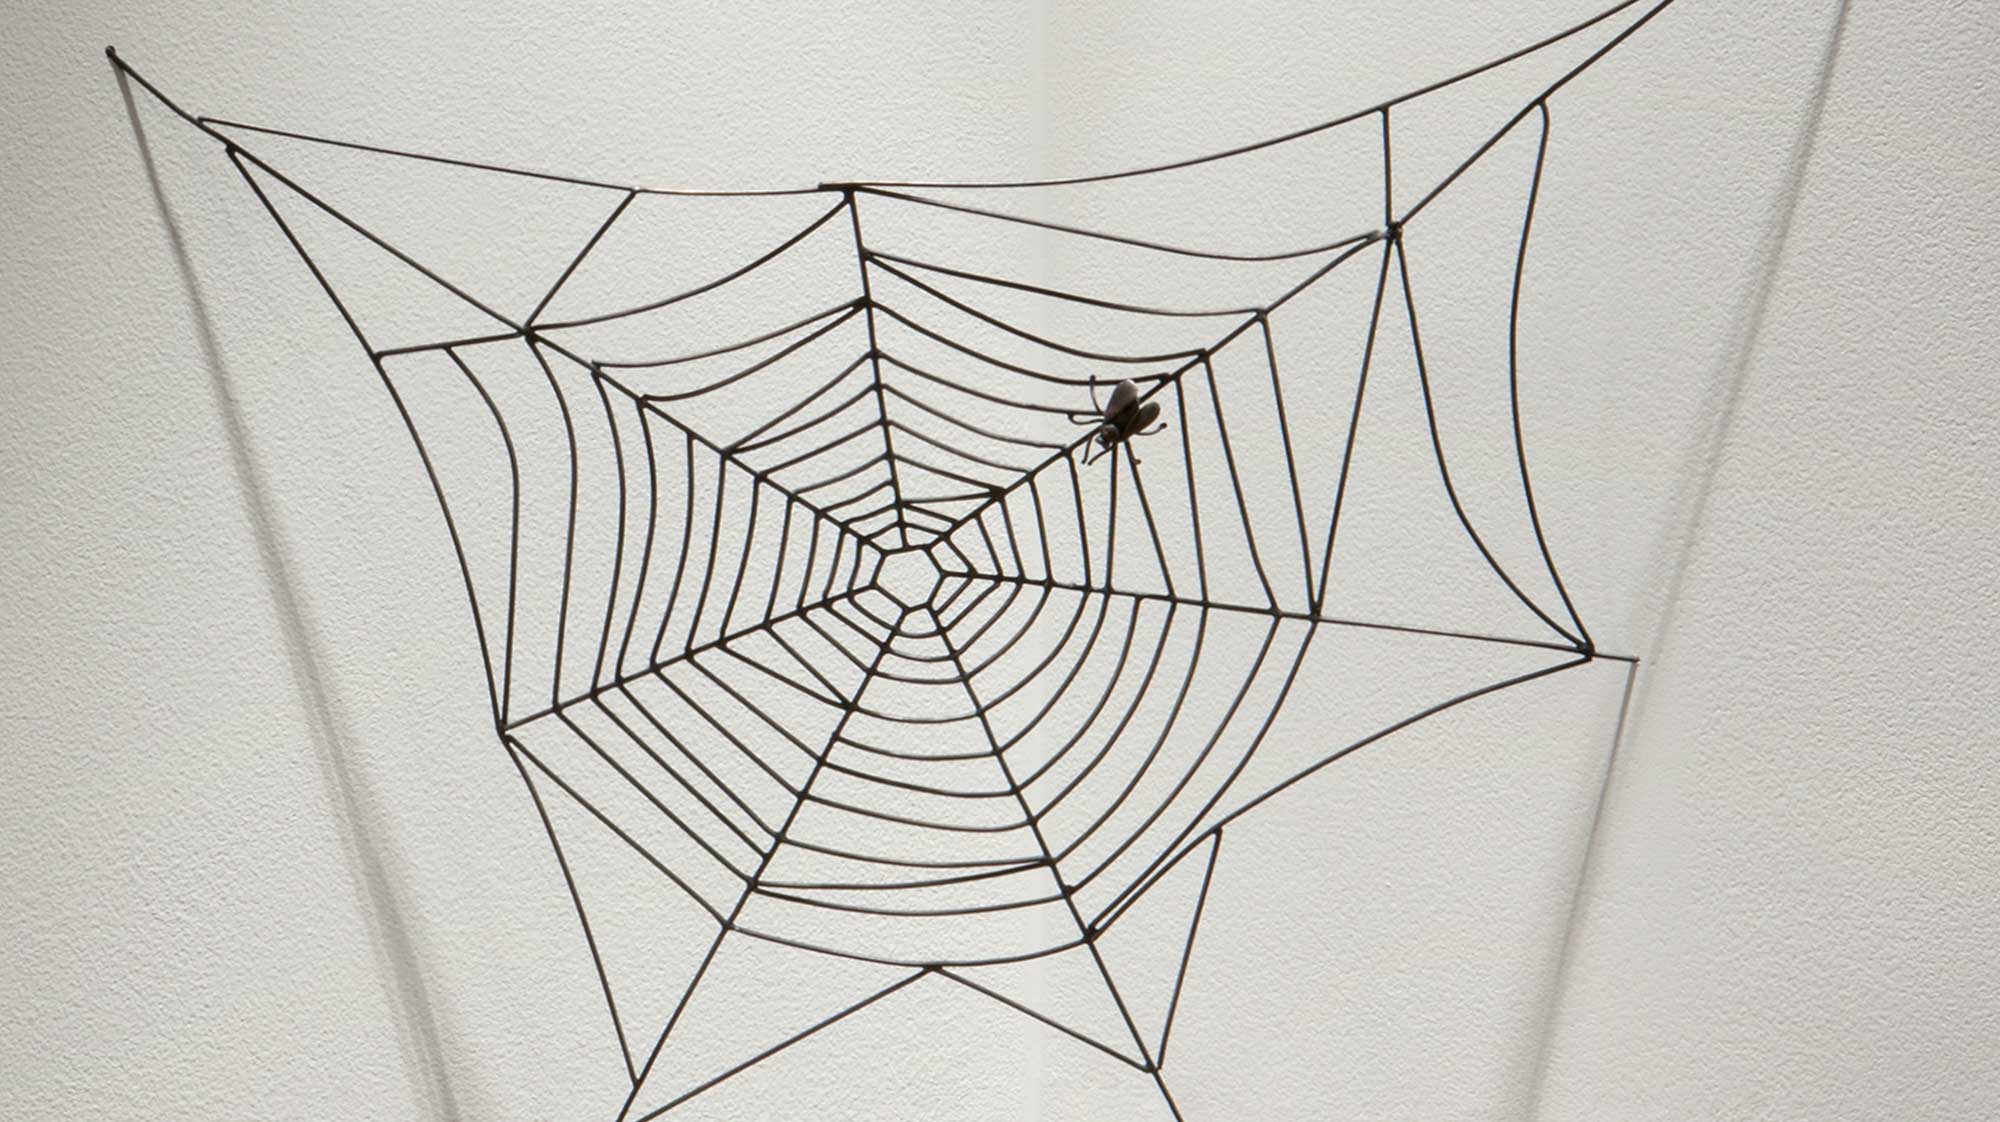 D.I.Y. wire sculptures inspired by Louise Bourgeois's “Spider 